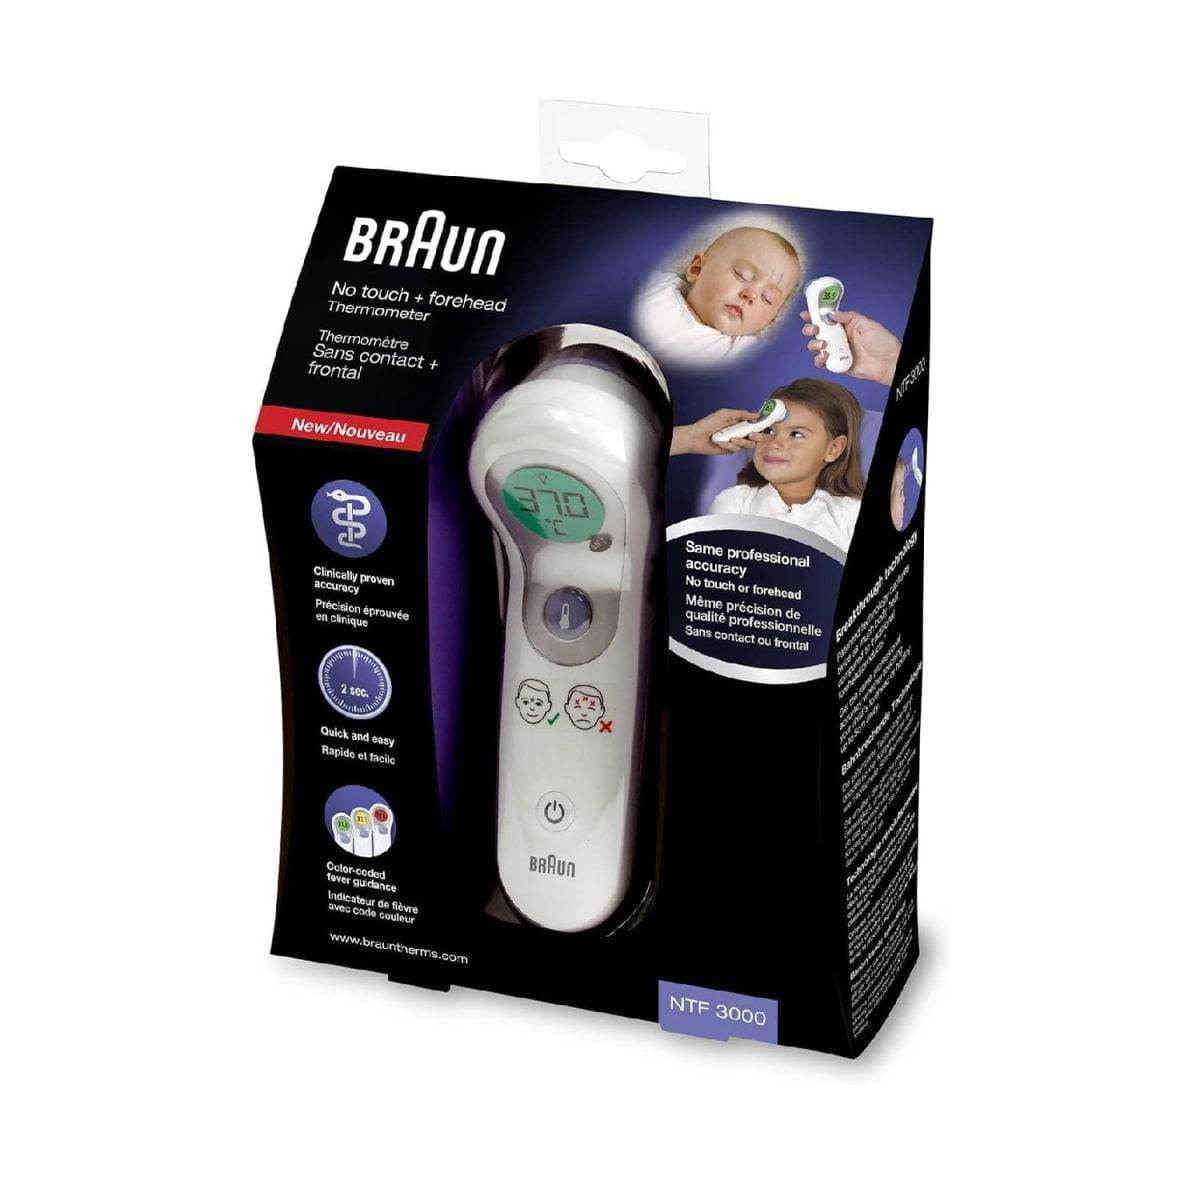 Lablab8 07 Braun &Lt;Div Class=&Quot;Product Attribute Overview&Quot;&Gt; &Lt;Div Class=&Quot;Value&Quot;&Gt; &Lt;Ul&Gt; &Lt;Li&Gt;Quick And Convenient Measurement In Both No Touch And Touch Mode&Lt;/Li&Gt; &Lt;Li&Gt;Colour-Coded Temperature Guidance&Lt;/Li&Gt; &Lt;Li&Gt;Silent Mode&Lt;/Li&Gt; &Lt;/Ul&Gt; [Video Width=&Quot;720&Quot; Height=&Quot;404&Quot; Mp4=&Quot;Https://Lablaab.com/Wp-Content/Uploads/2020/05/B1T8F7T-Ias.mp4&Quot;][/Video] &Lt;/Div&Gt; &Lt;/Div&Gt; Braun No Touch Plus Touch Forehead Thermometer (Ntf3000)